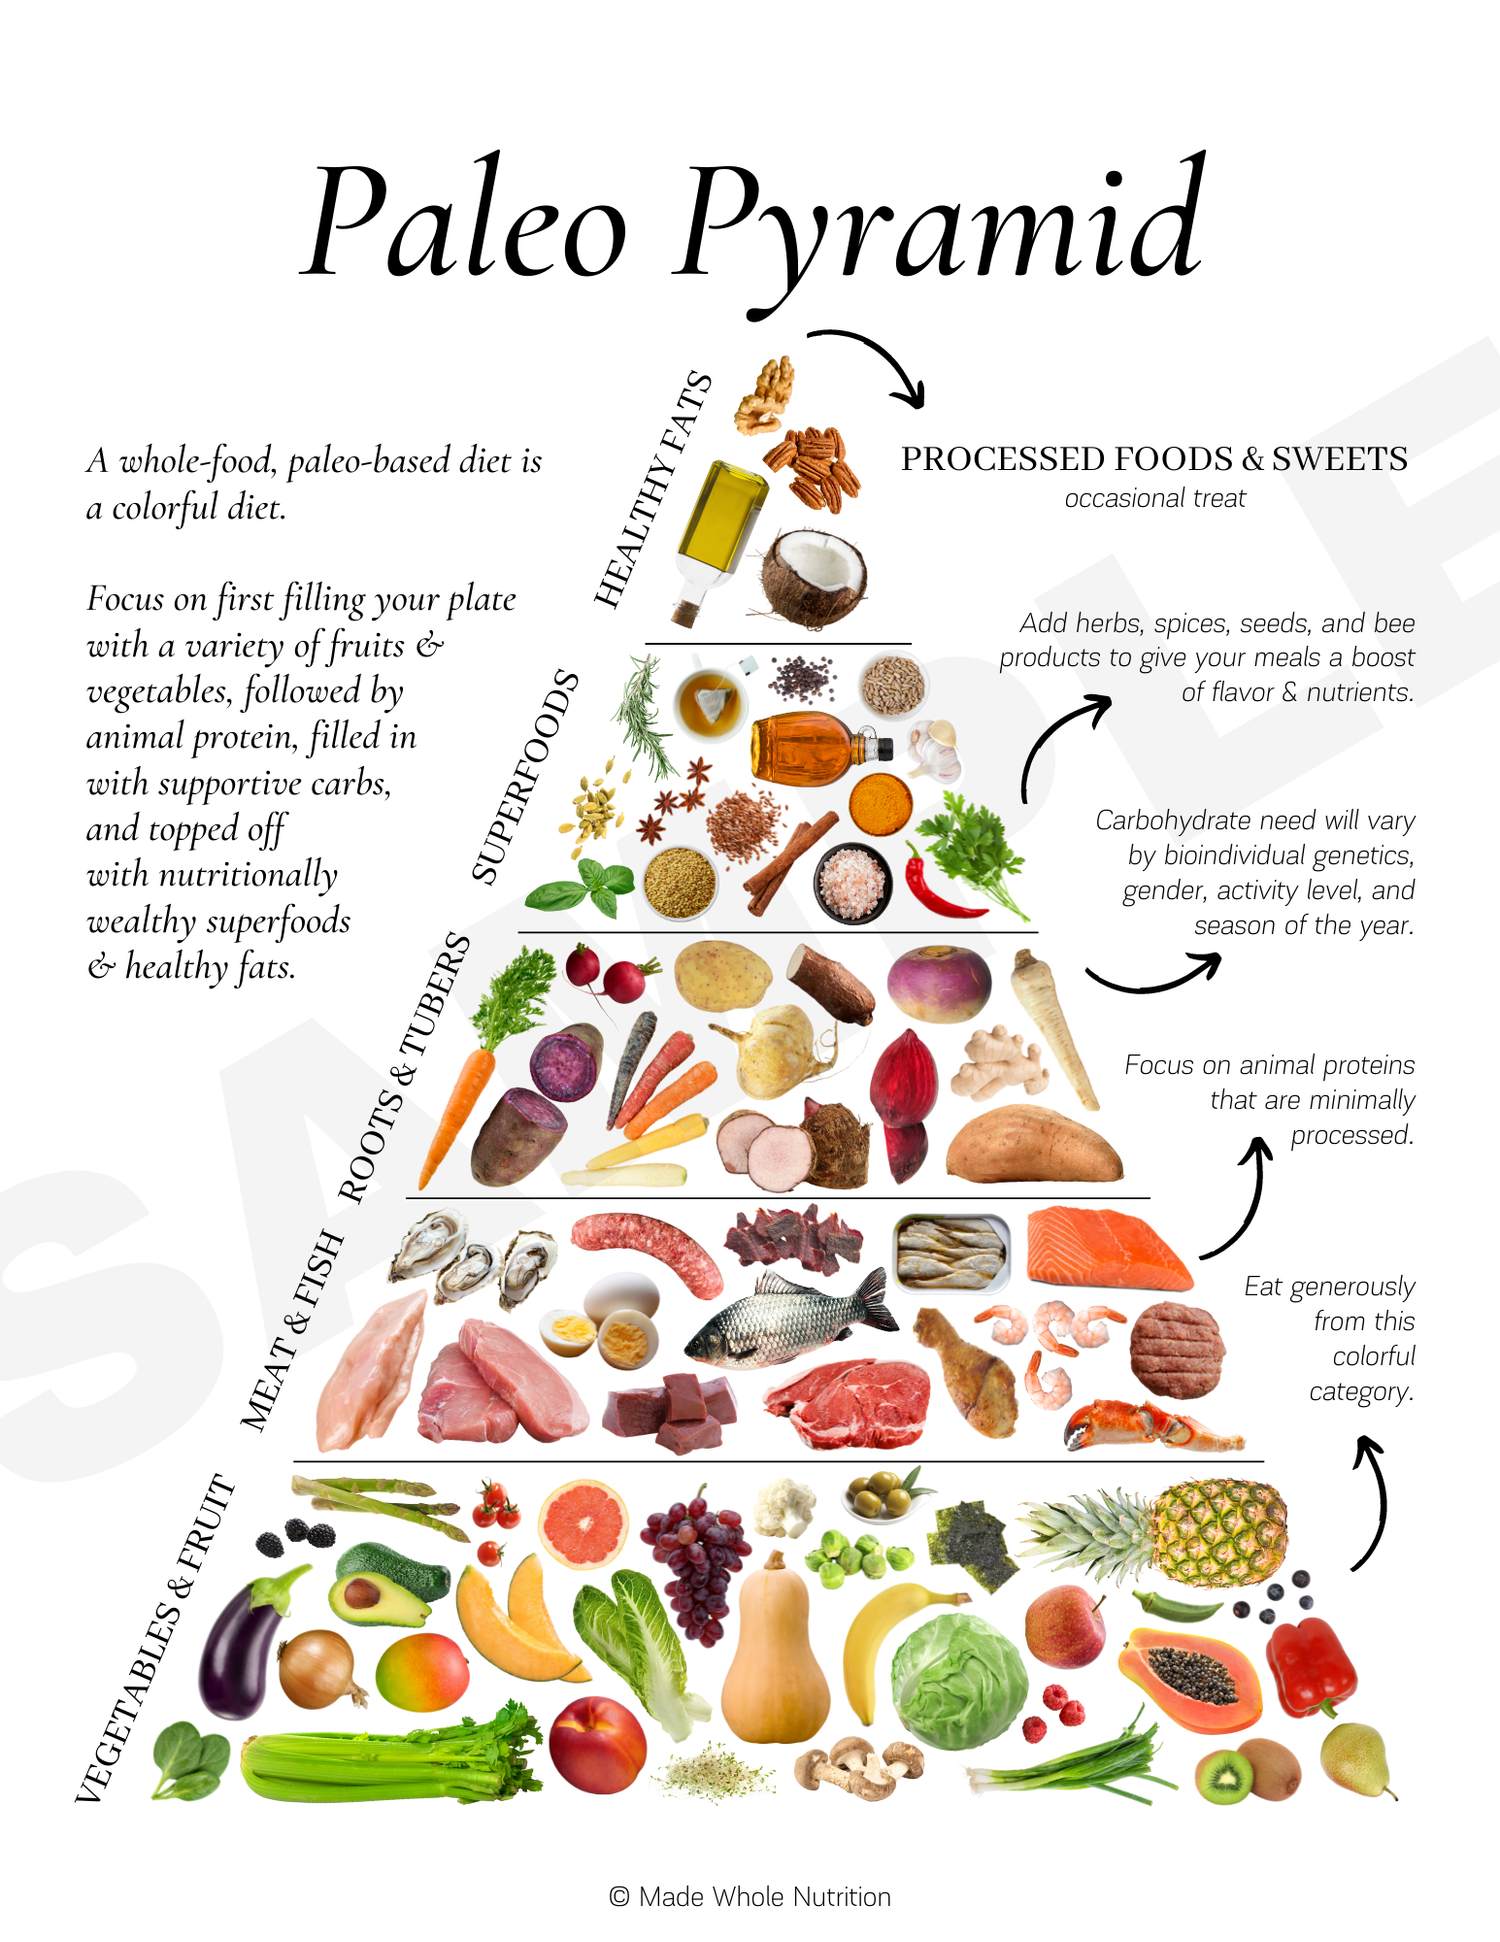 Paleo Diet: What to Eat